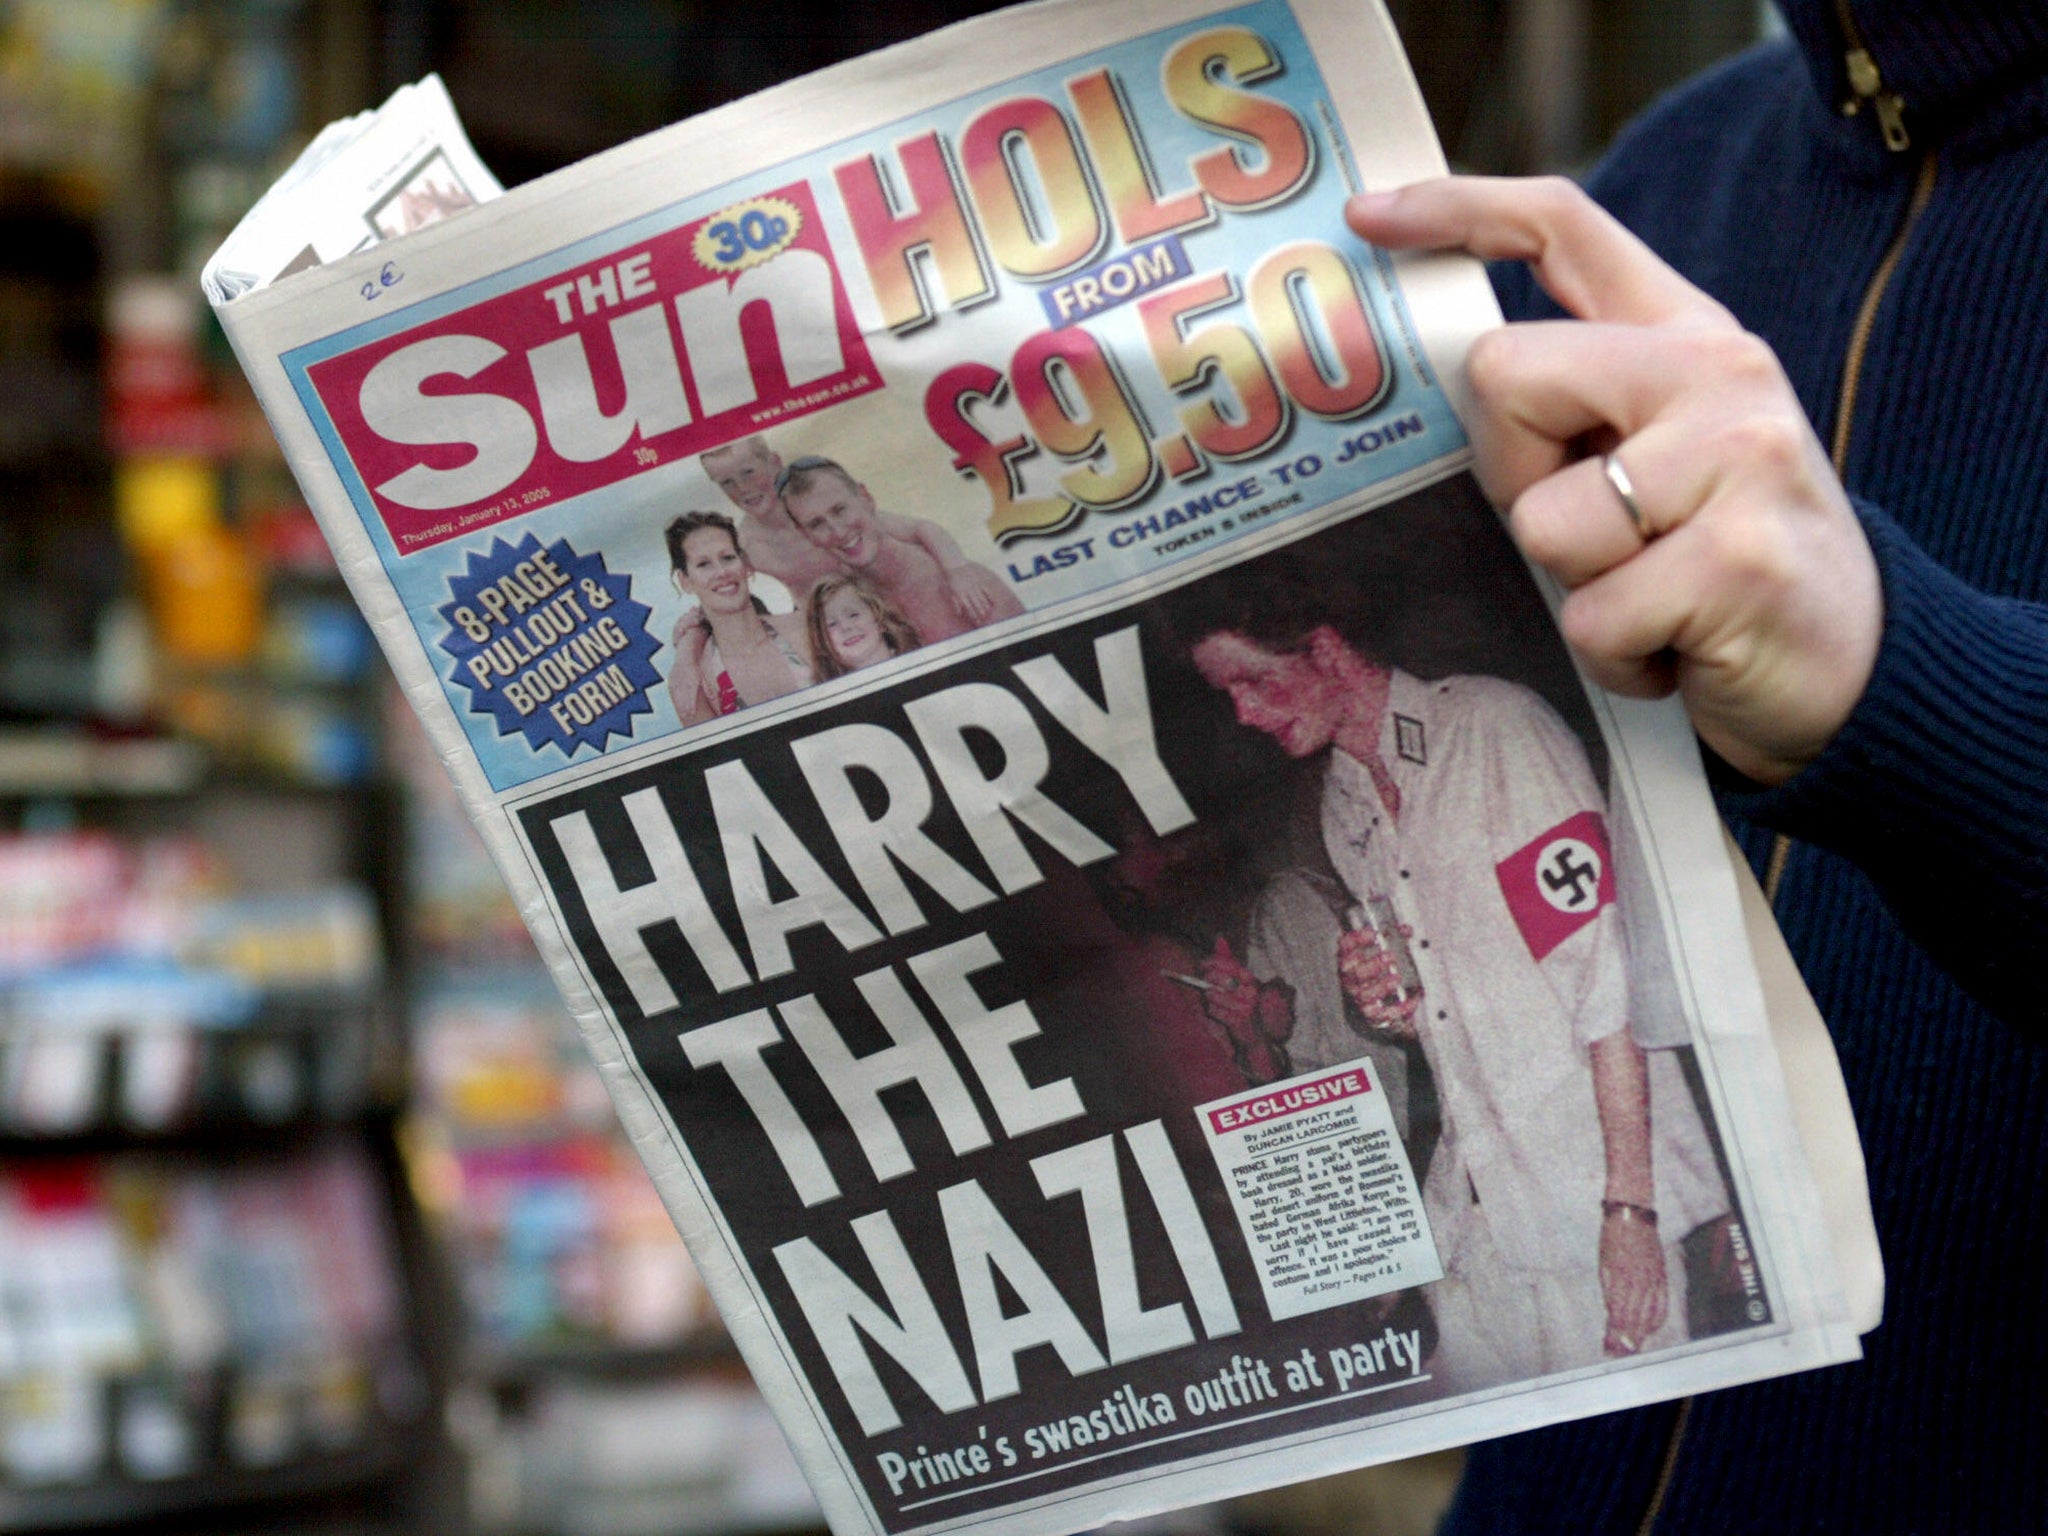 The notorious Sun front page